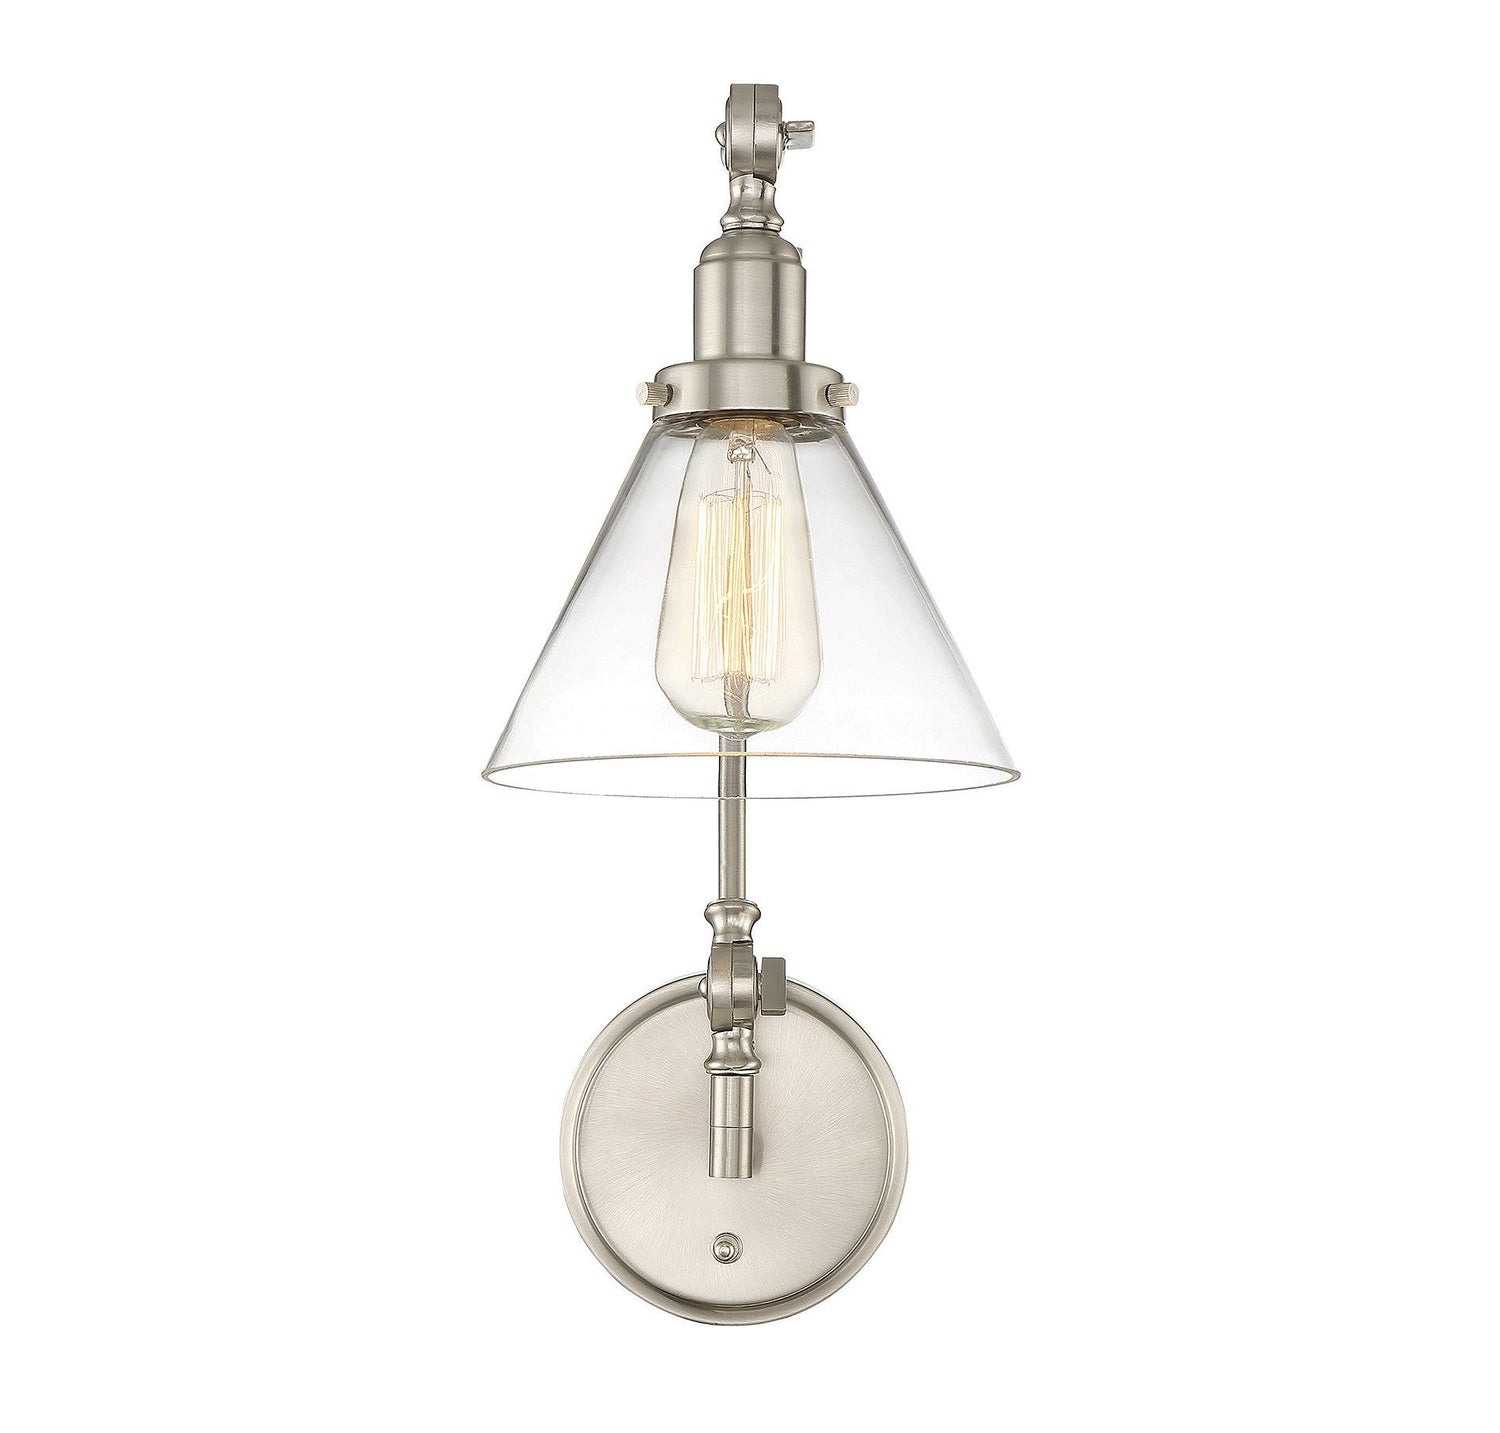 Savoy House Drake Swing Arm Wall Sconce in Satin Nickel with Clear Glass Cone Shade 9-9131CP-1-SN